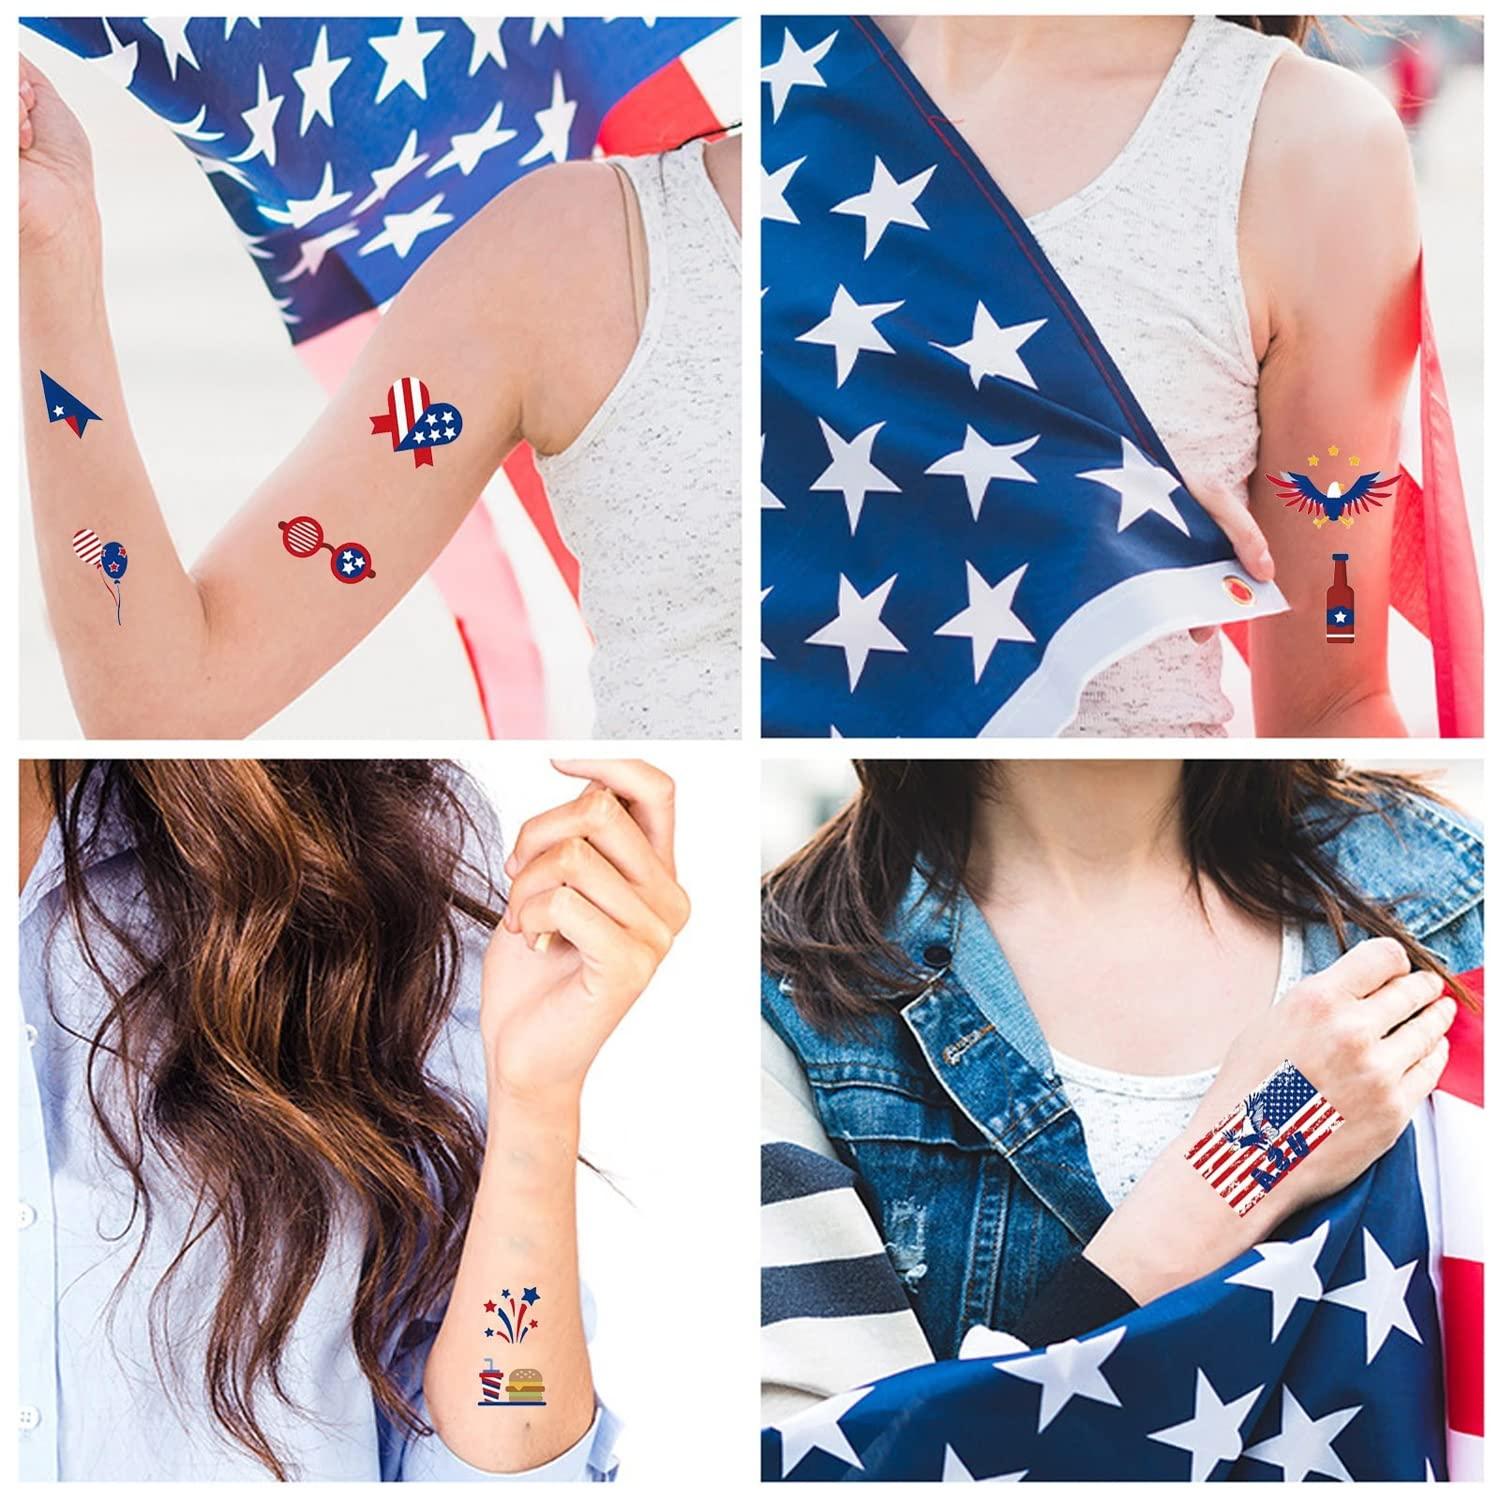 Buy USA Flag Tattoos Patriotic Stickers Independence Day July 4th Party  Decoration Body Art Fake Temporary Tattoos Decals for Women Men Girls Kids  Face Arm Skin Decor Supplies 31 Patterns Online at